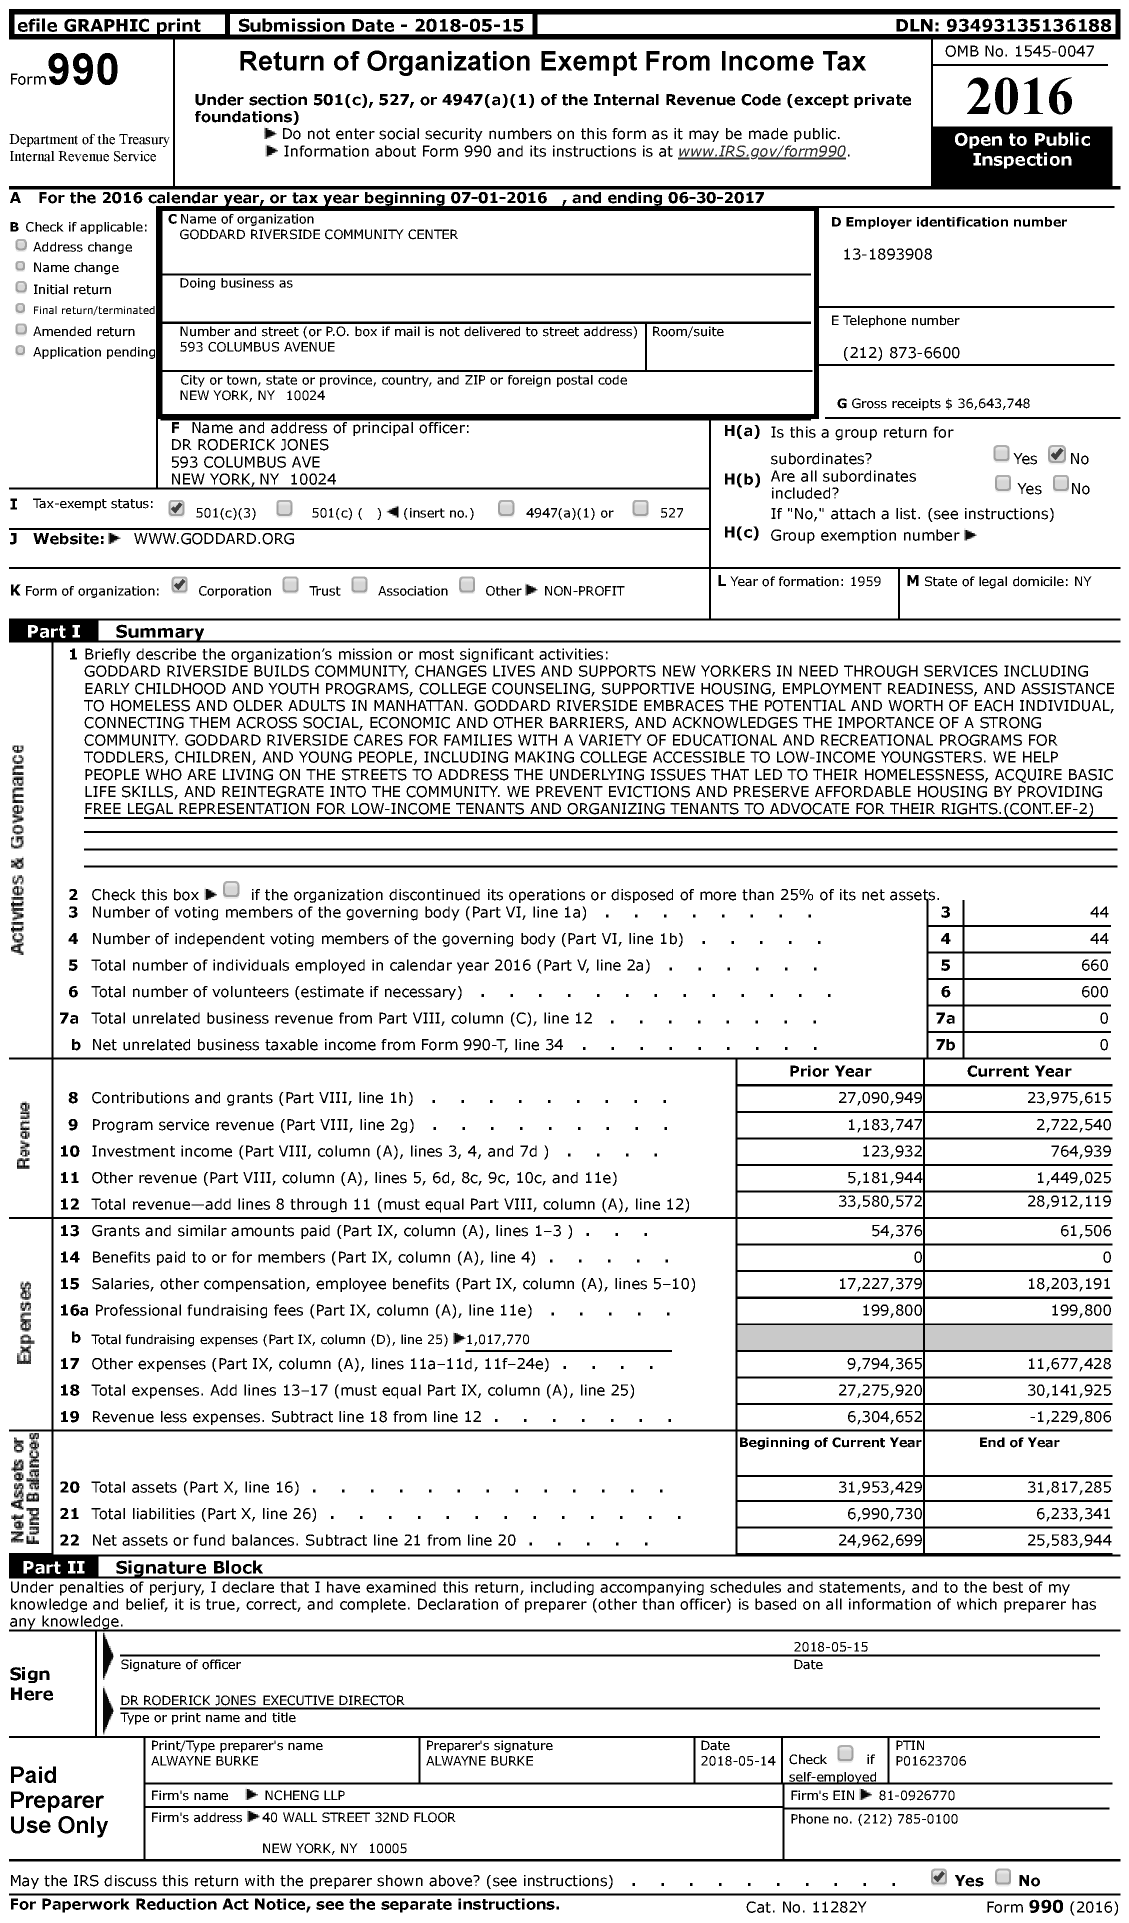 Image of first page of 2016 Form 990 for Goddard Riverside Community Center